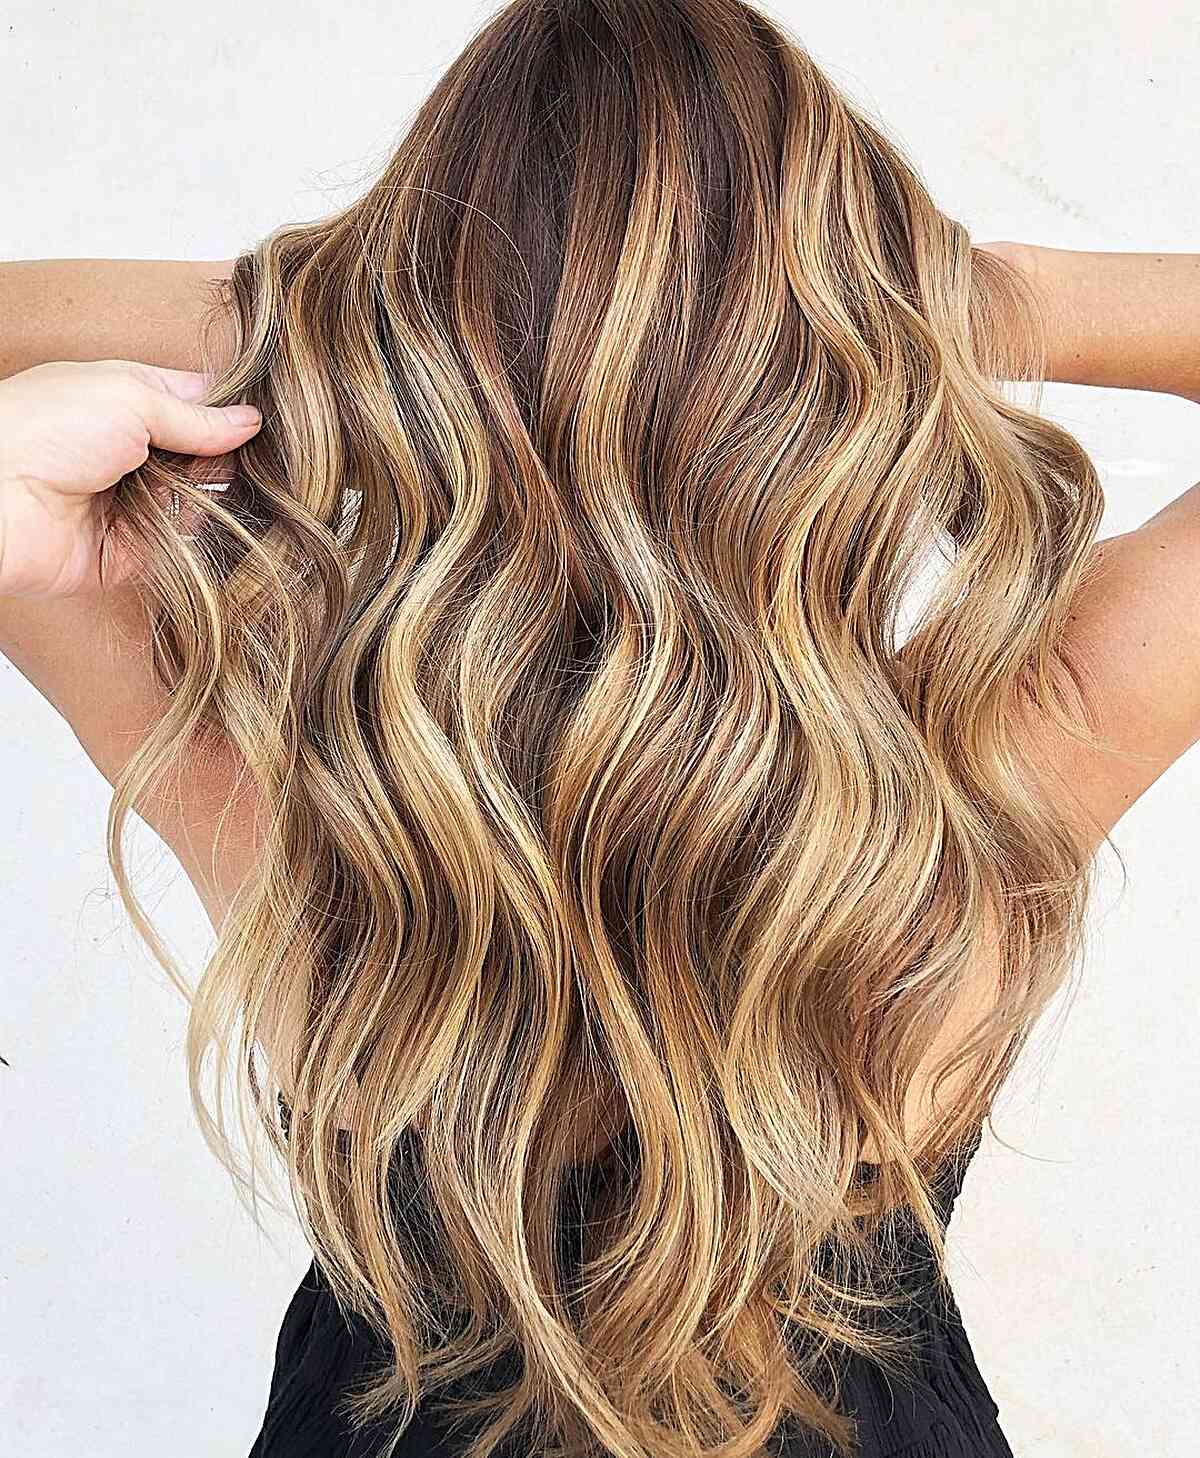 Butterscotch Bronde Hair Color for women with long wavy hair